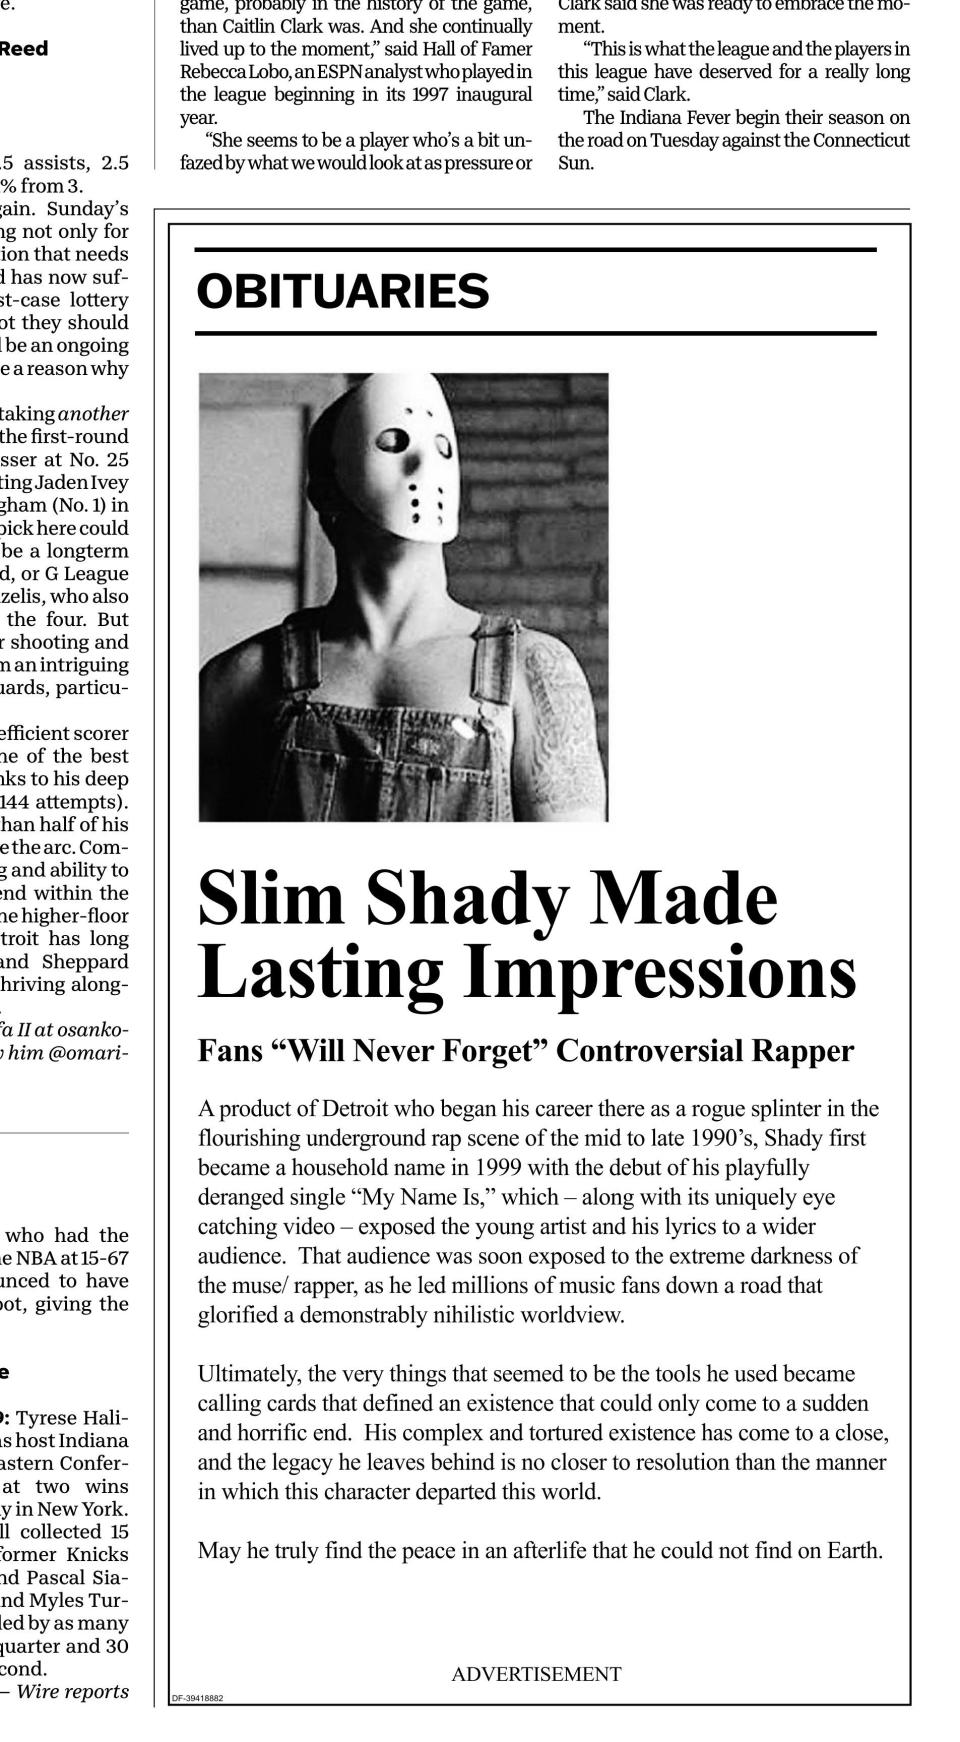 The Monday print edition of the Detroit Free Press includes an ad in the form of an obituary for Eminem's Slim Shady character